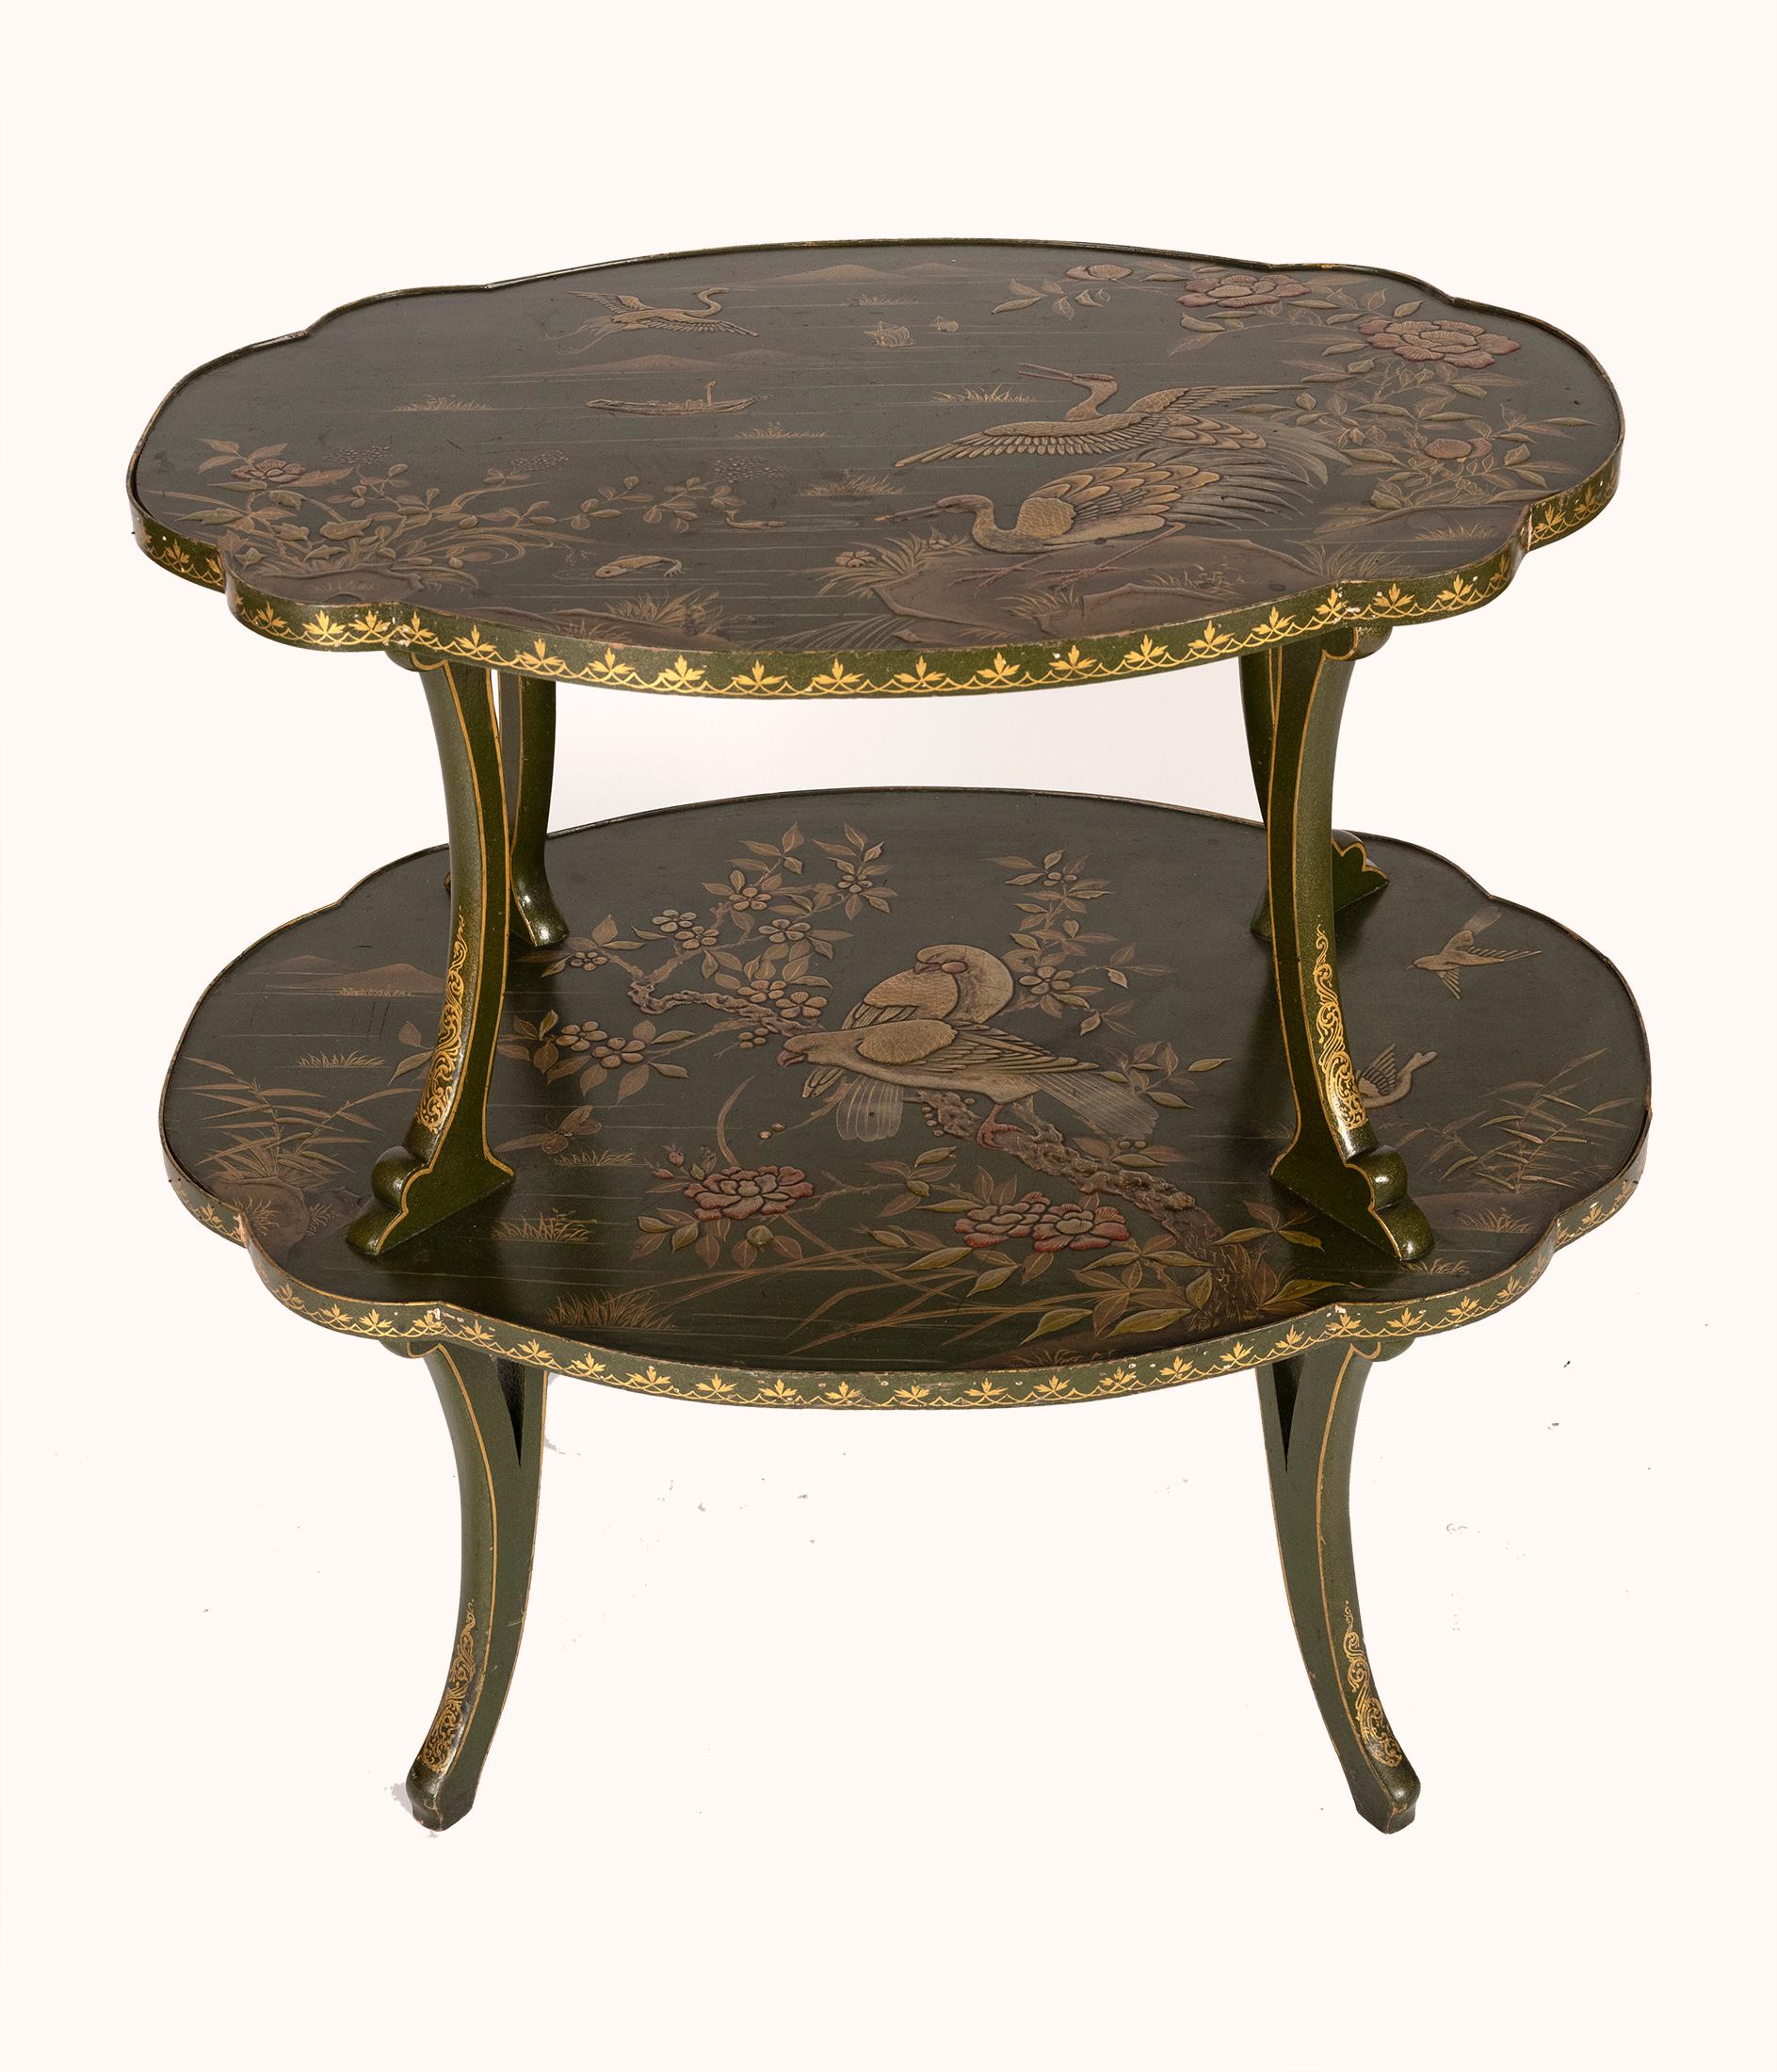 A two tiered oval side table Art Nouveau style most likely by Louis Majorelle. The oval surfaces having each surface decorated with raised Chinese inspired paintings depicting birds in a landscape the ends with scalloped edges having leaf motif